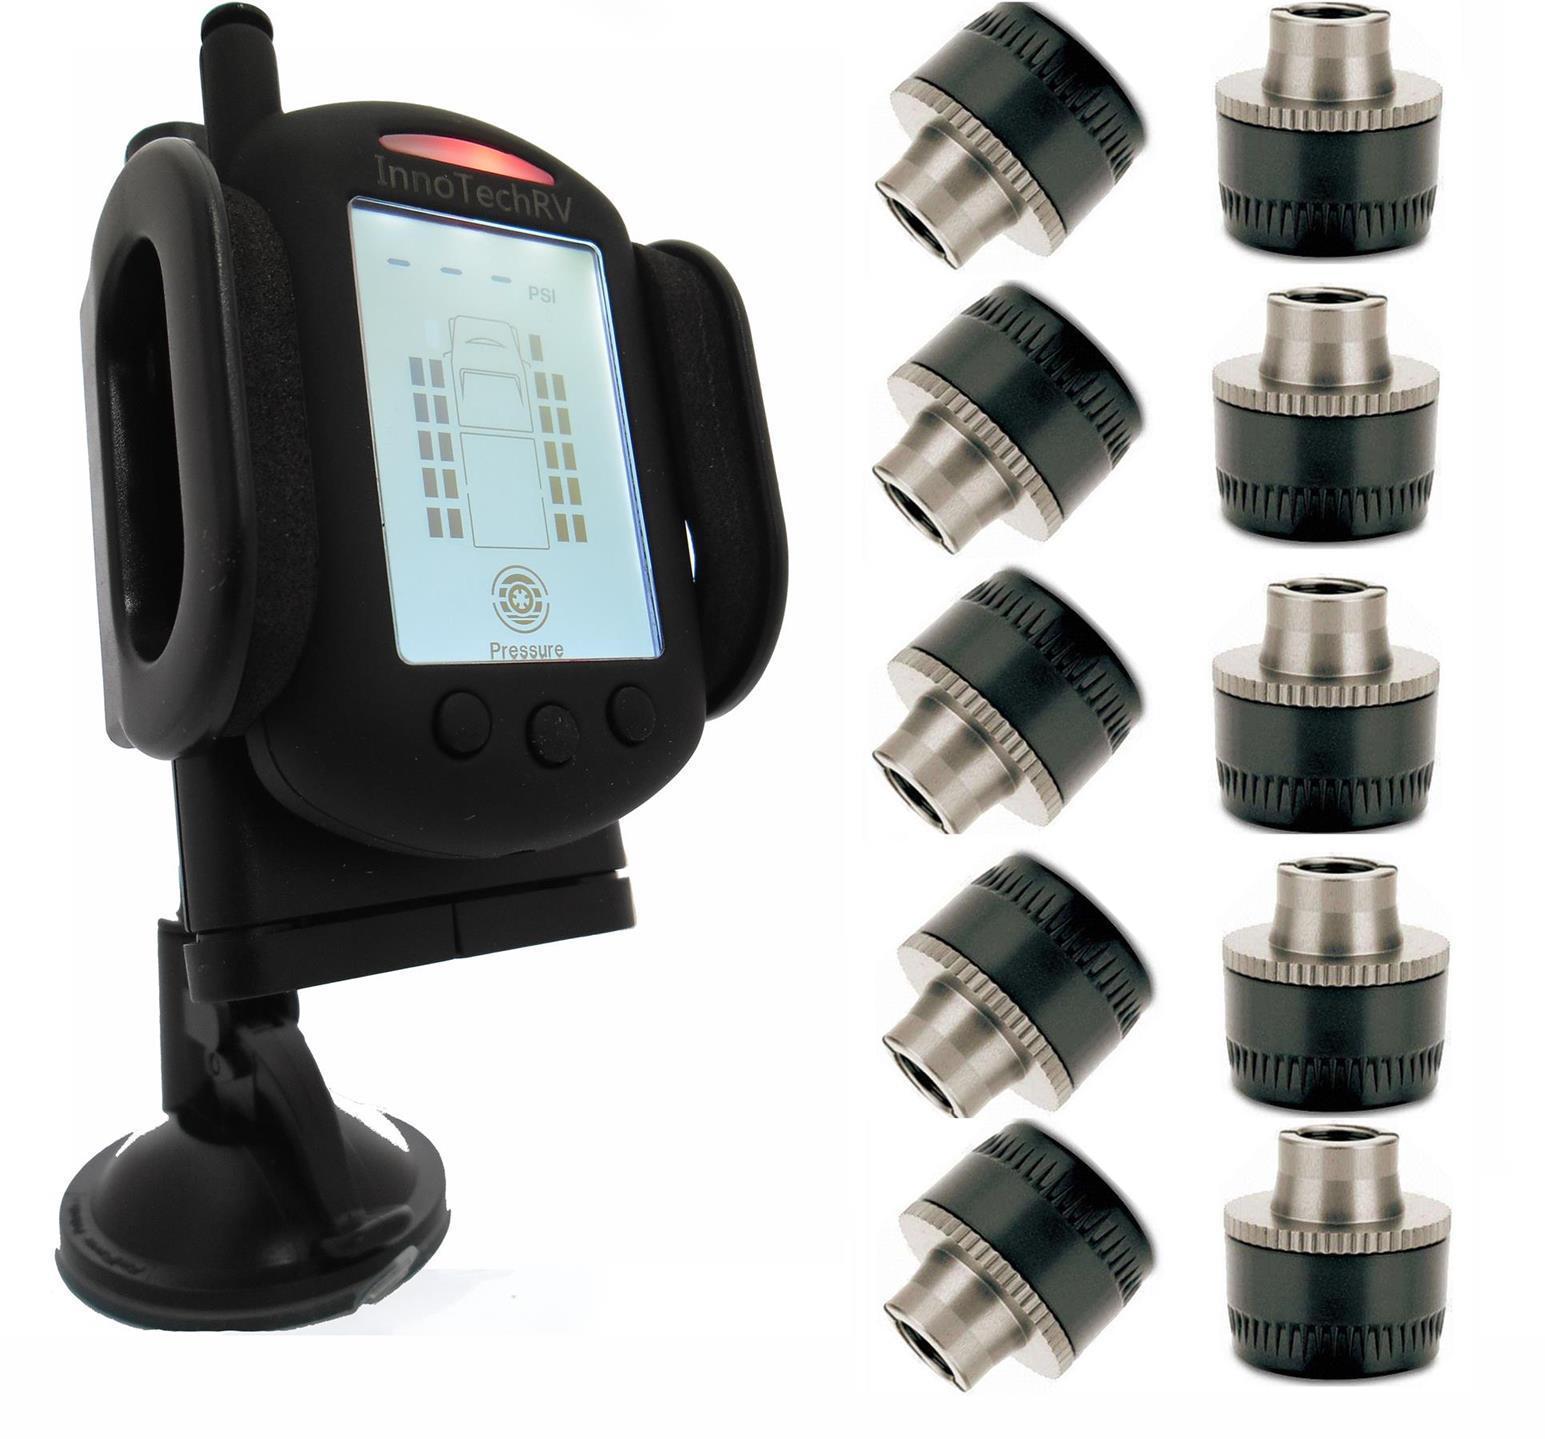 Primary image for Tire Pressure Monitoring System Truck/RV, 10 Wheels Lifetime Warranty TPMS-10